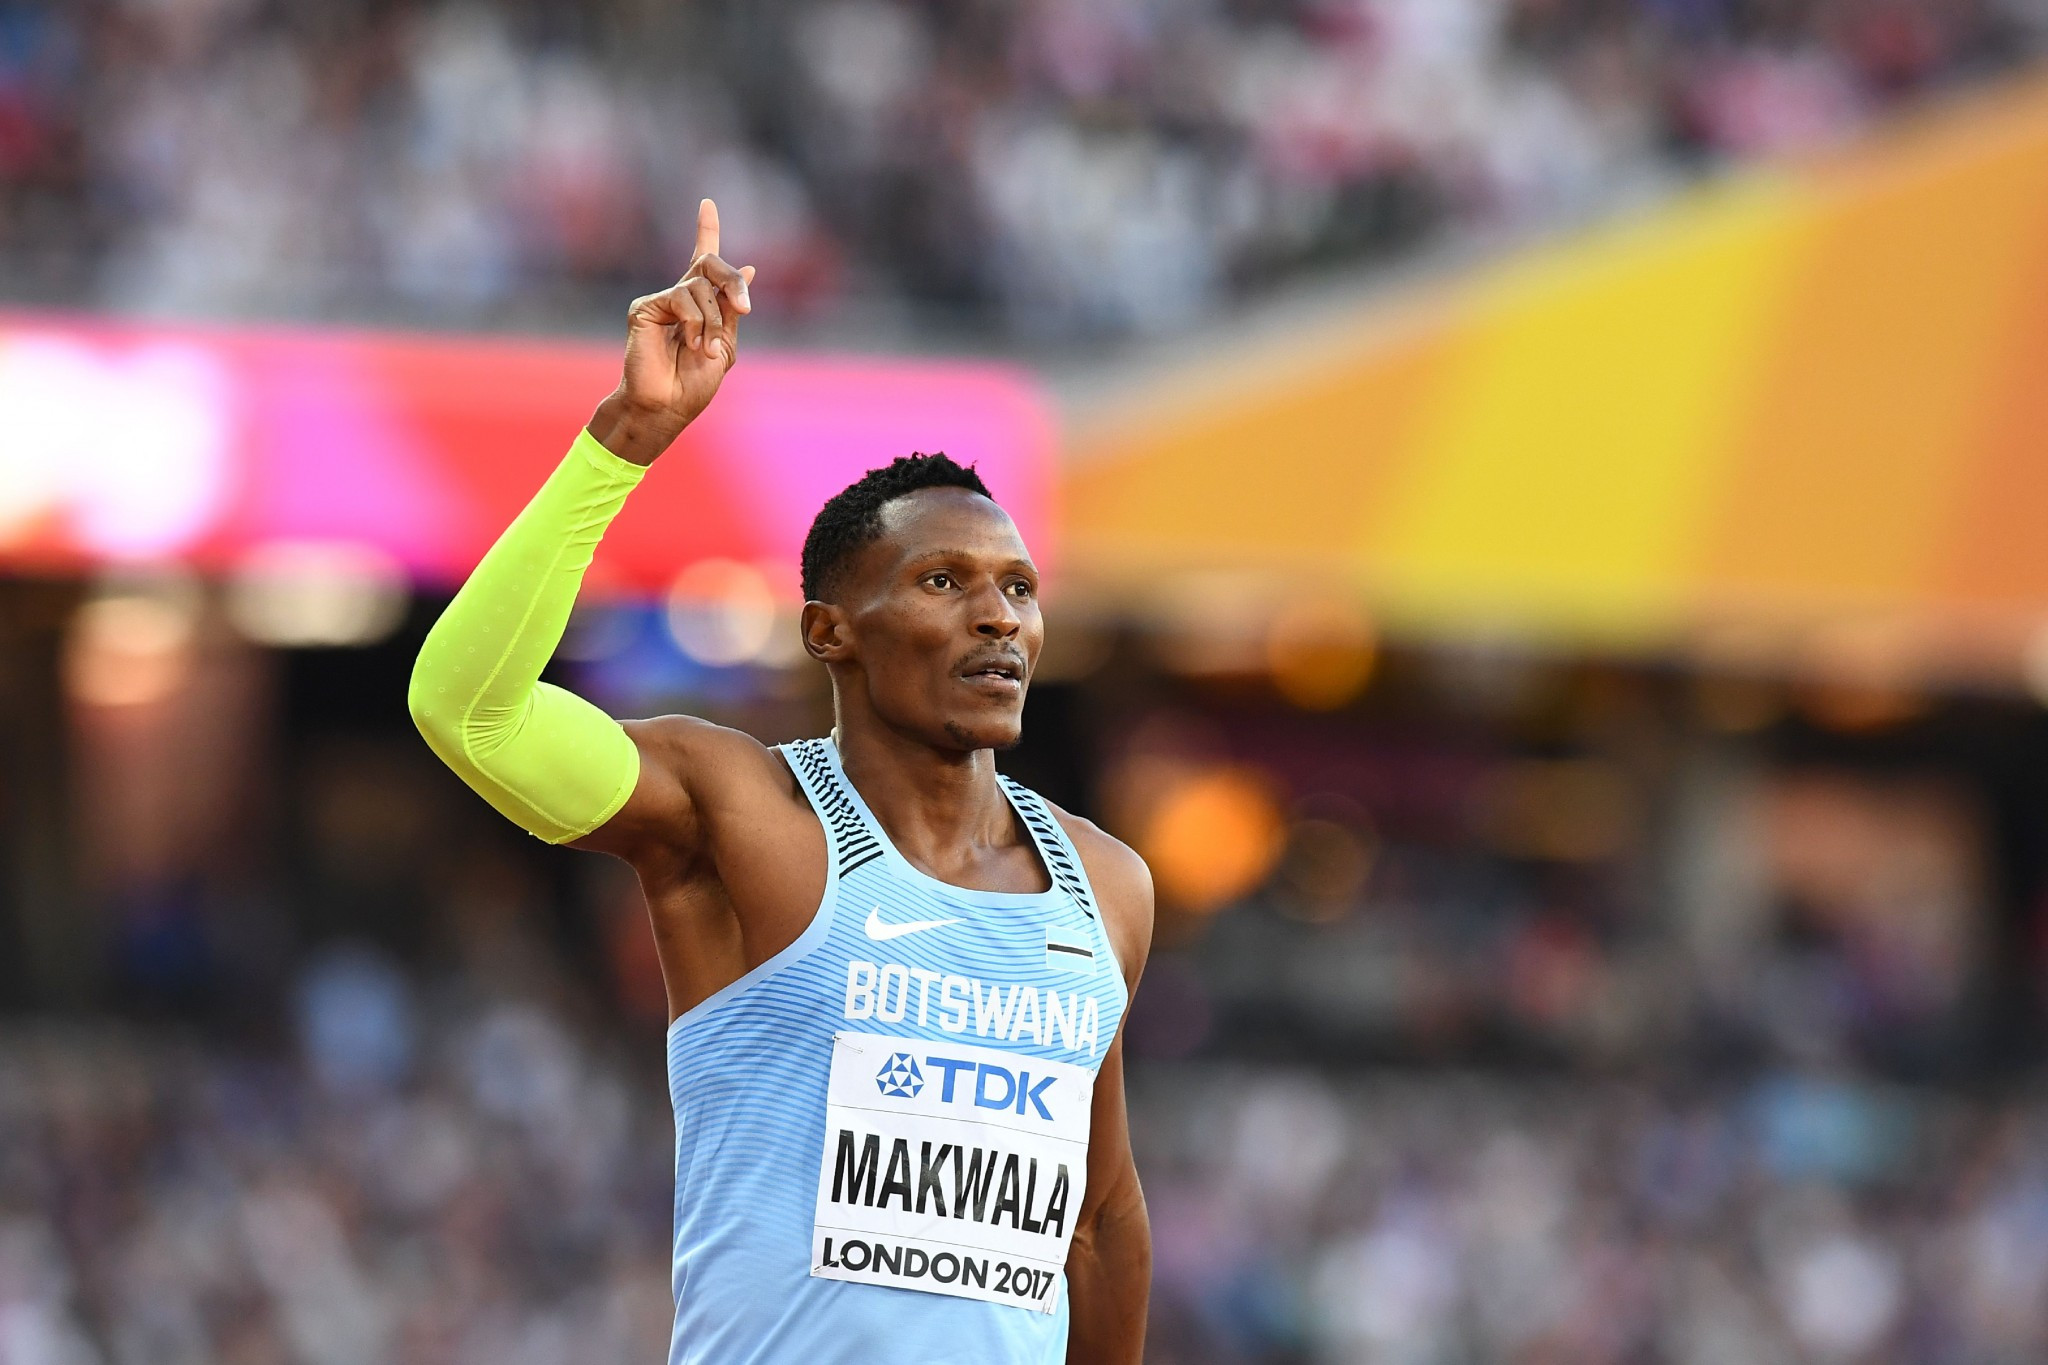 Makwala qualifies for 200m final at World Championships after IAAF clear him to compete